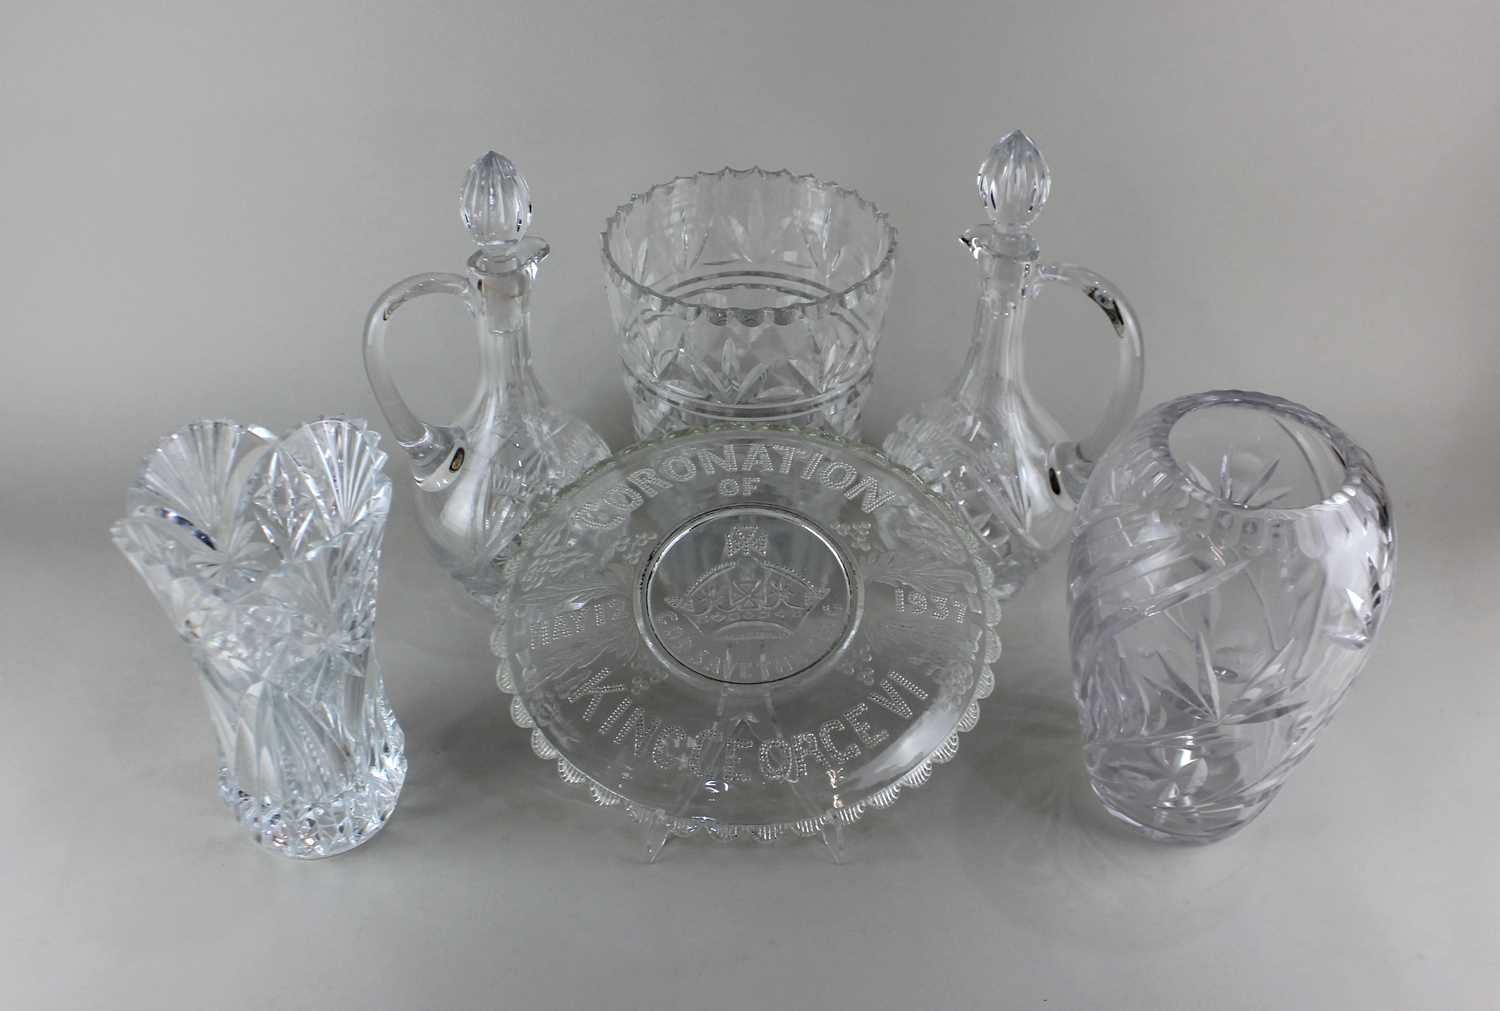 A selection of vintage glassware, to include a pair of Harrods lead crystal claret jugs with